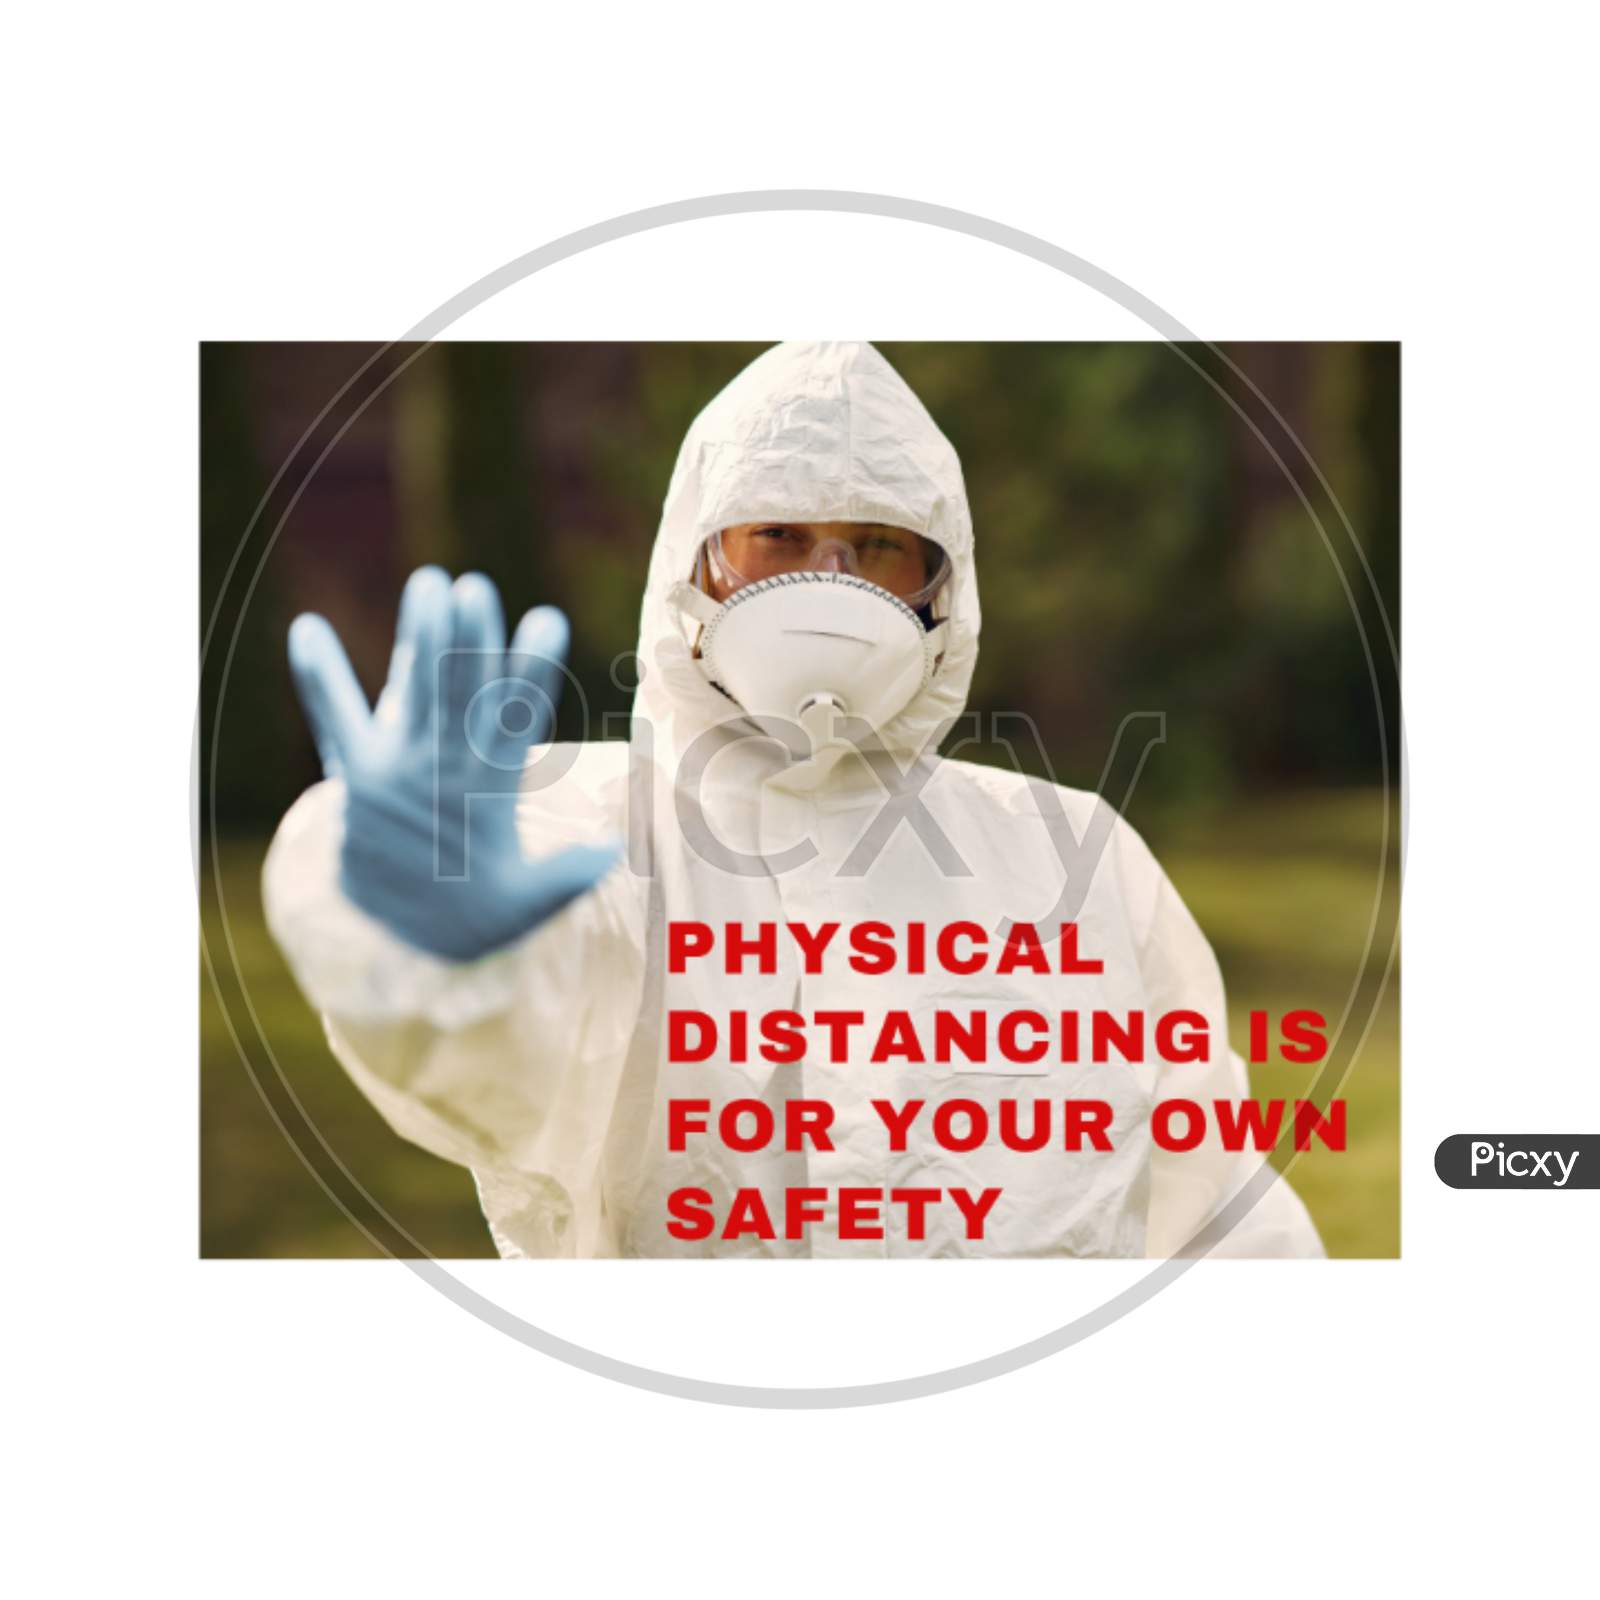 physical distancing is for your own safety text illustration